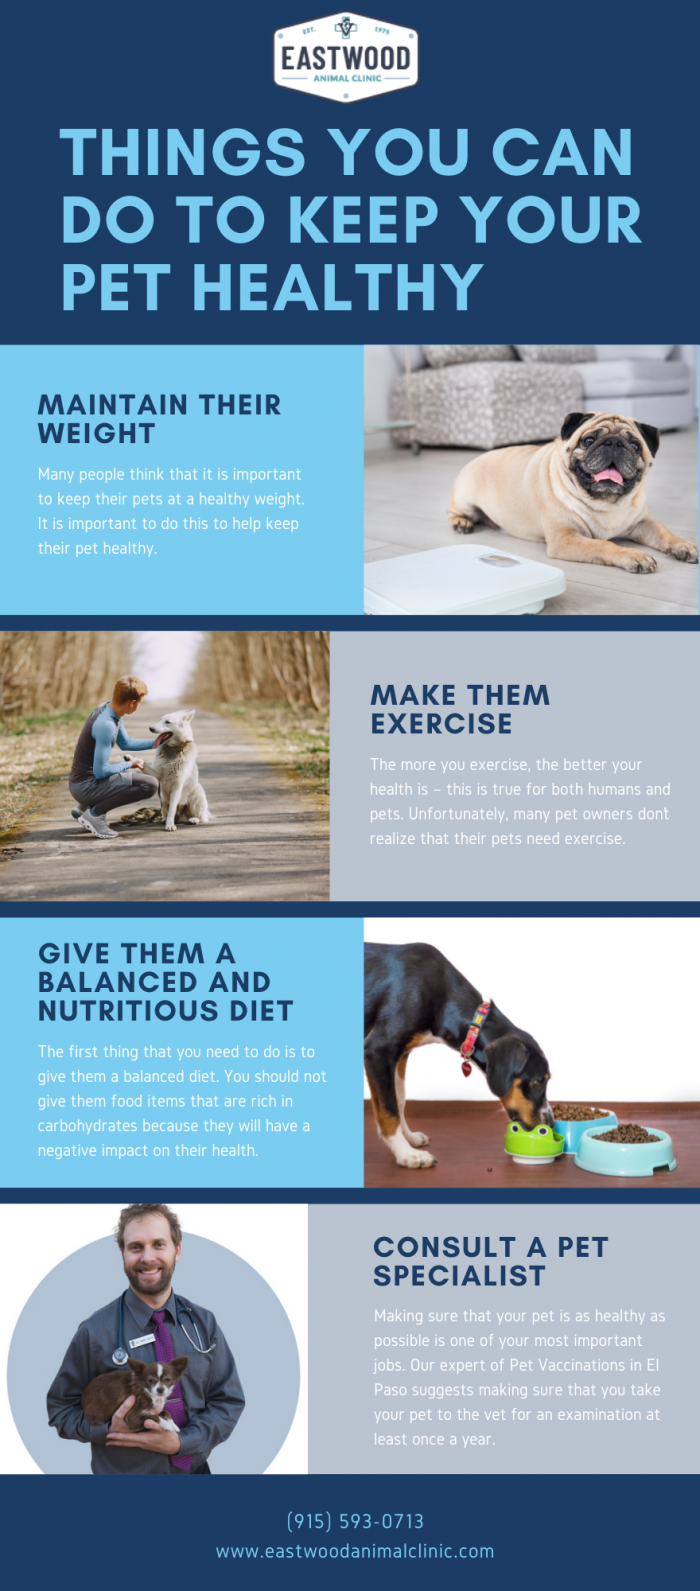 Things You Can Do to Keep Your Pet Healthy